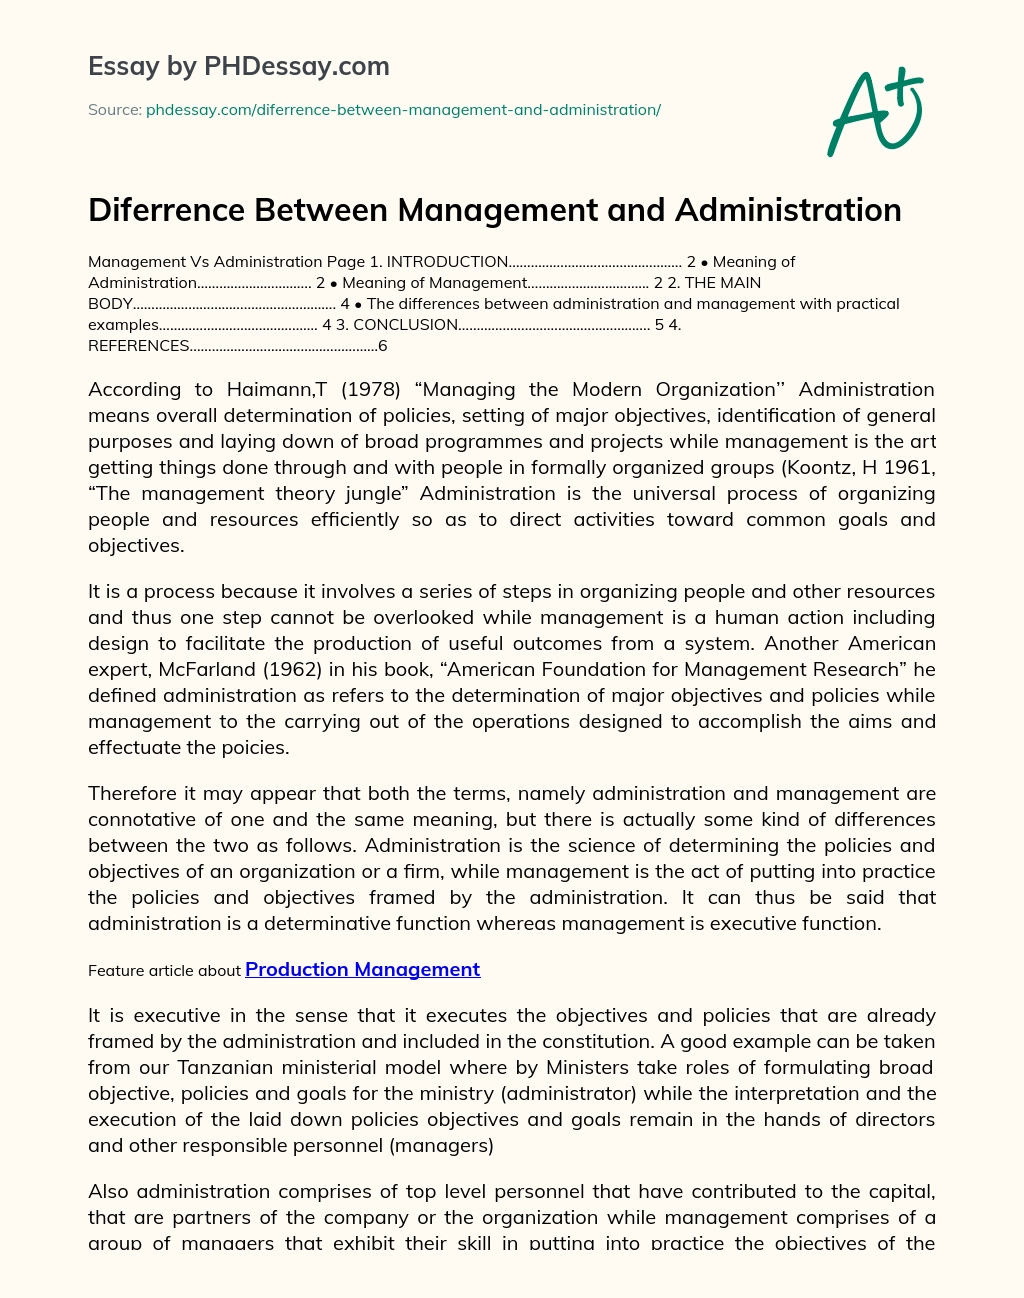 Diferrence Between Management and Administration essay